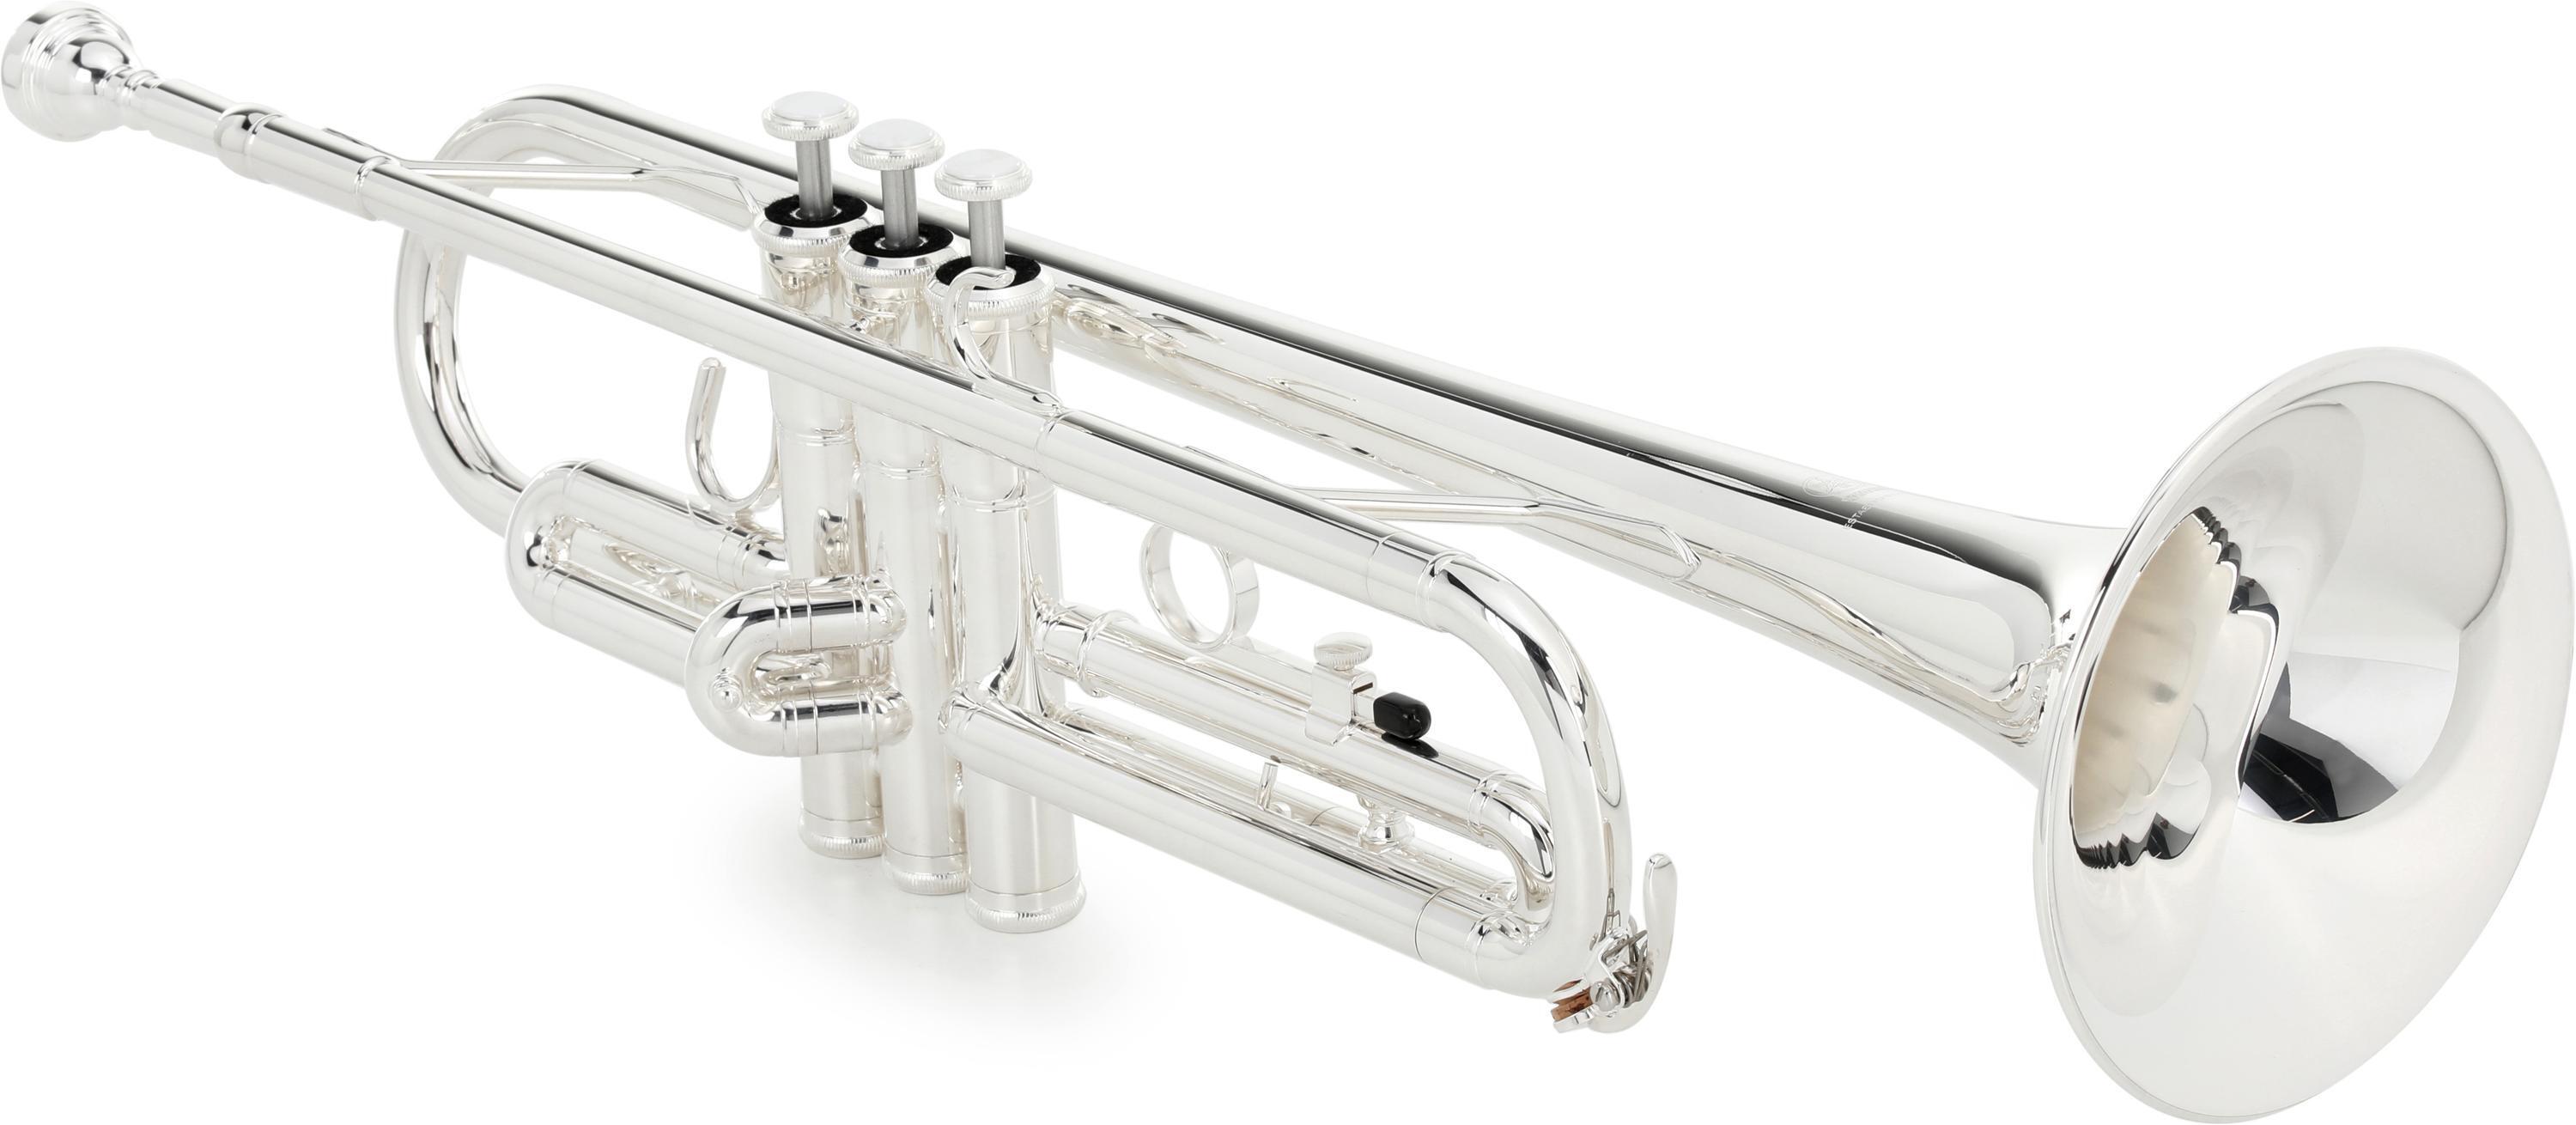 Yamaha YTR-2330 Student Bb Trumpet - Silver Plated | Sweetwater